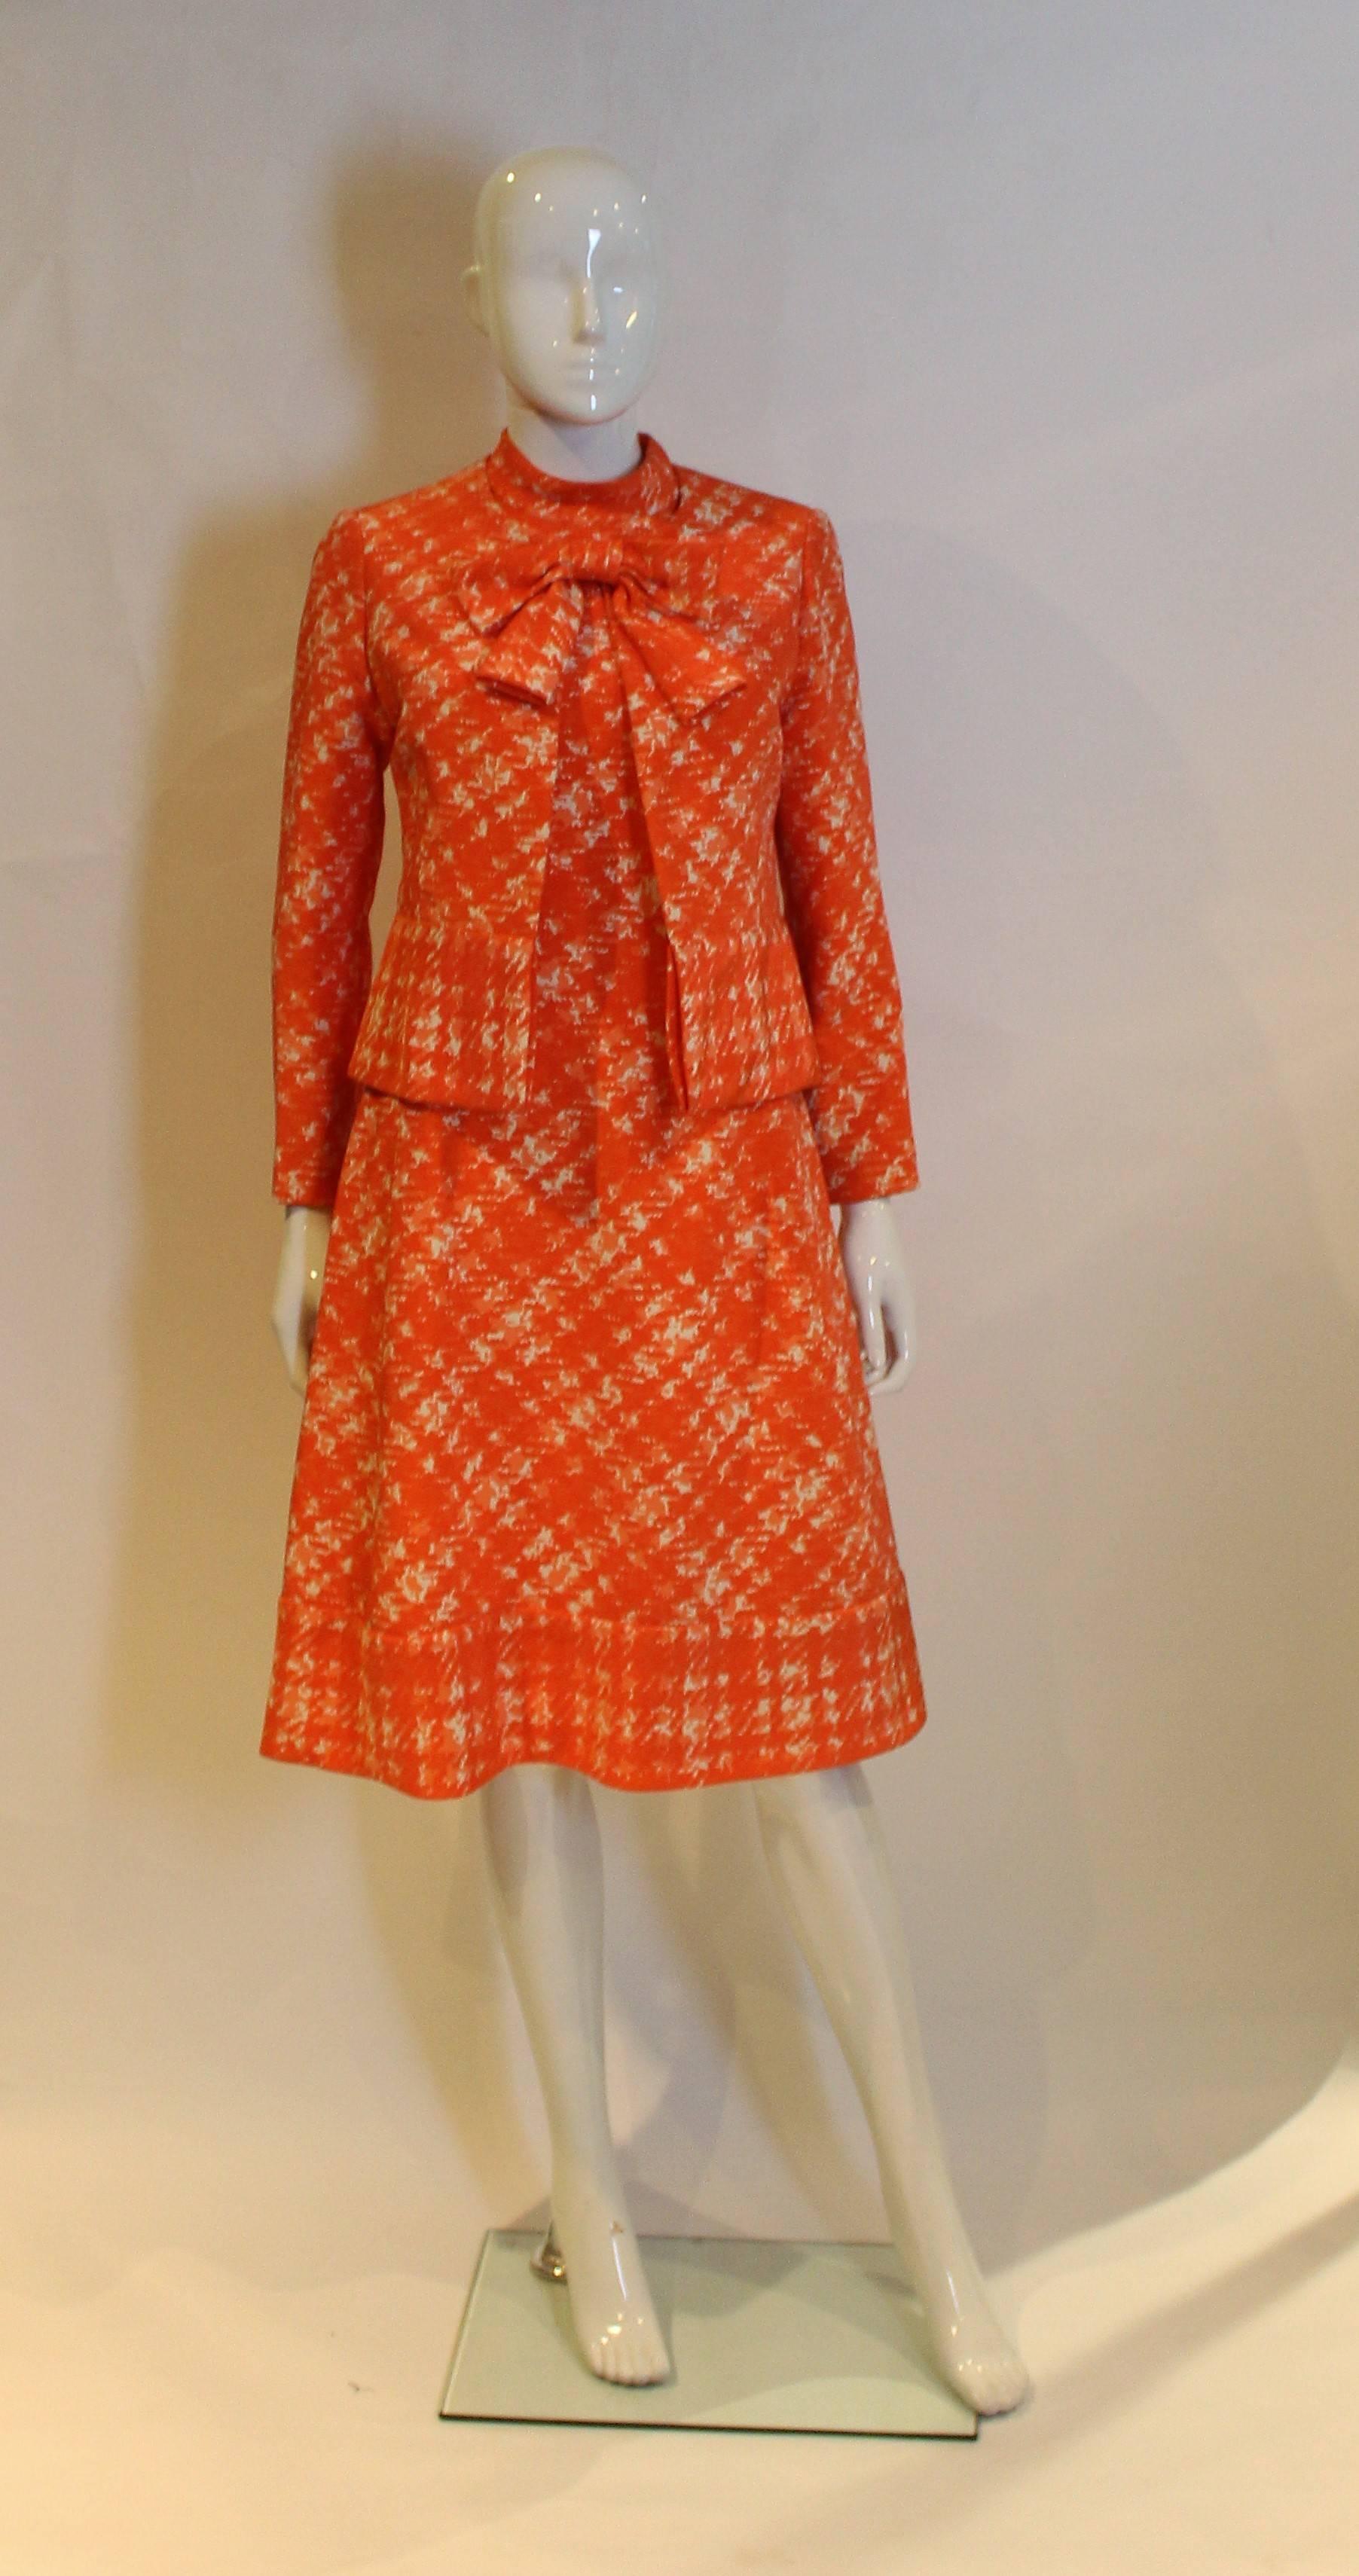 This is a stunning piece and so wonderfuly constructed. The fabric is a wonderful orange and ivory print, with a super silk lining and an inner lining of tuile like fabric. The dress has a central back zip and two large decorative buttons. There is